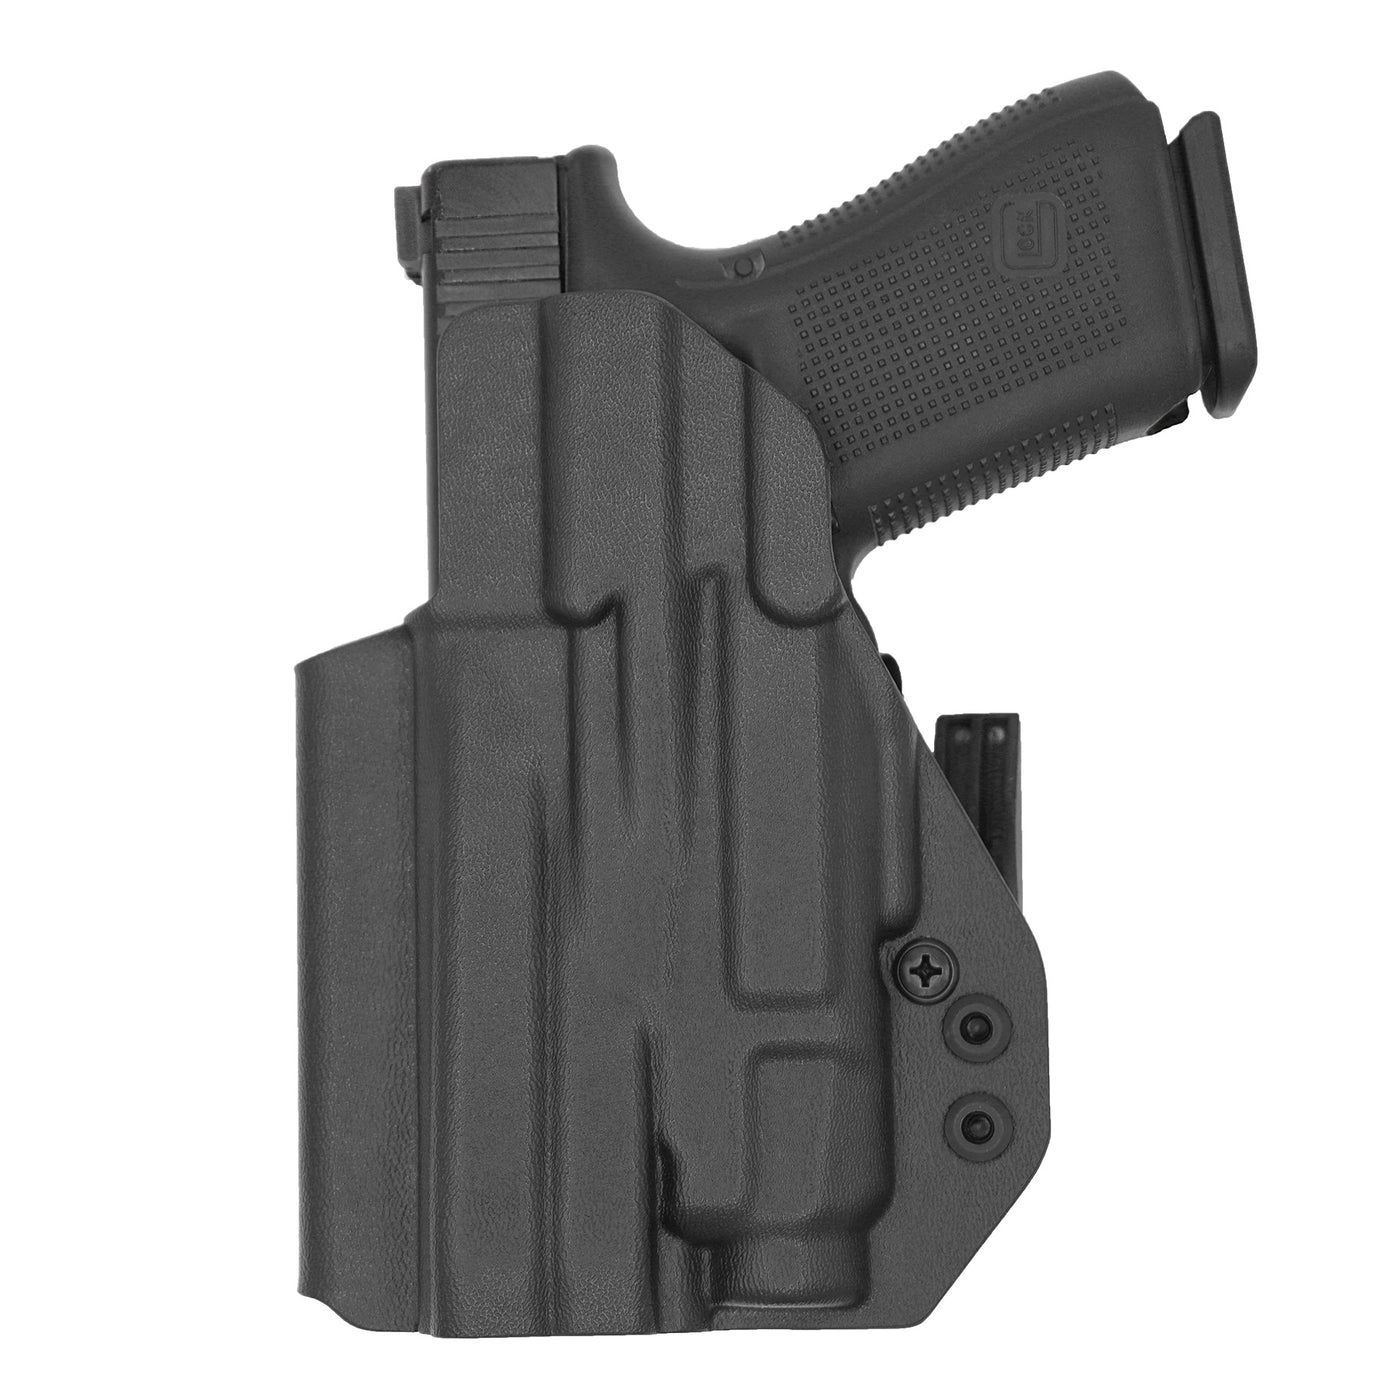 C&G Holsters custom IWB ALPHA UPGRADE Tactical CZ P10/c streamlight tlr7/a in holstered position back view